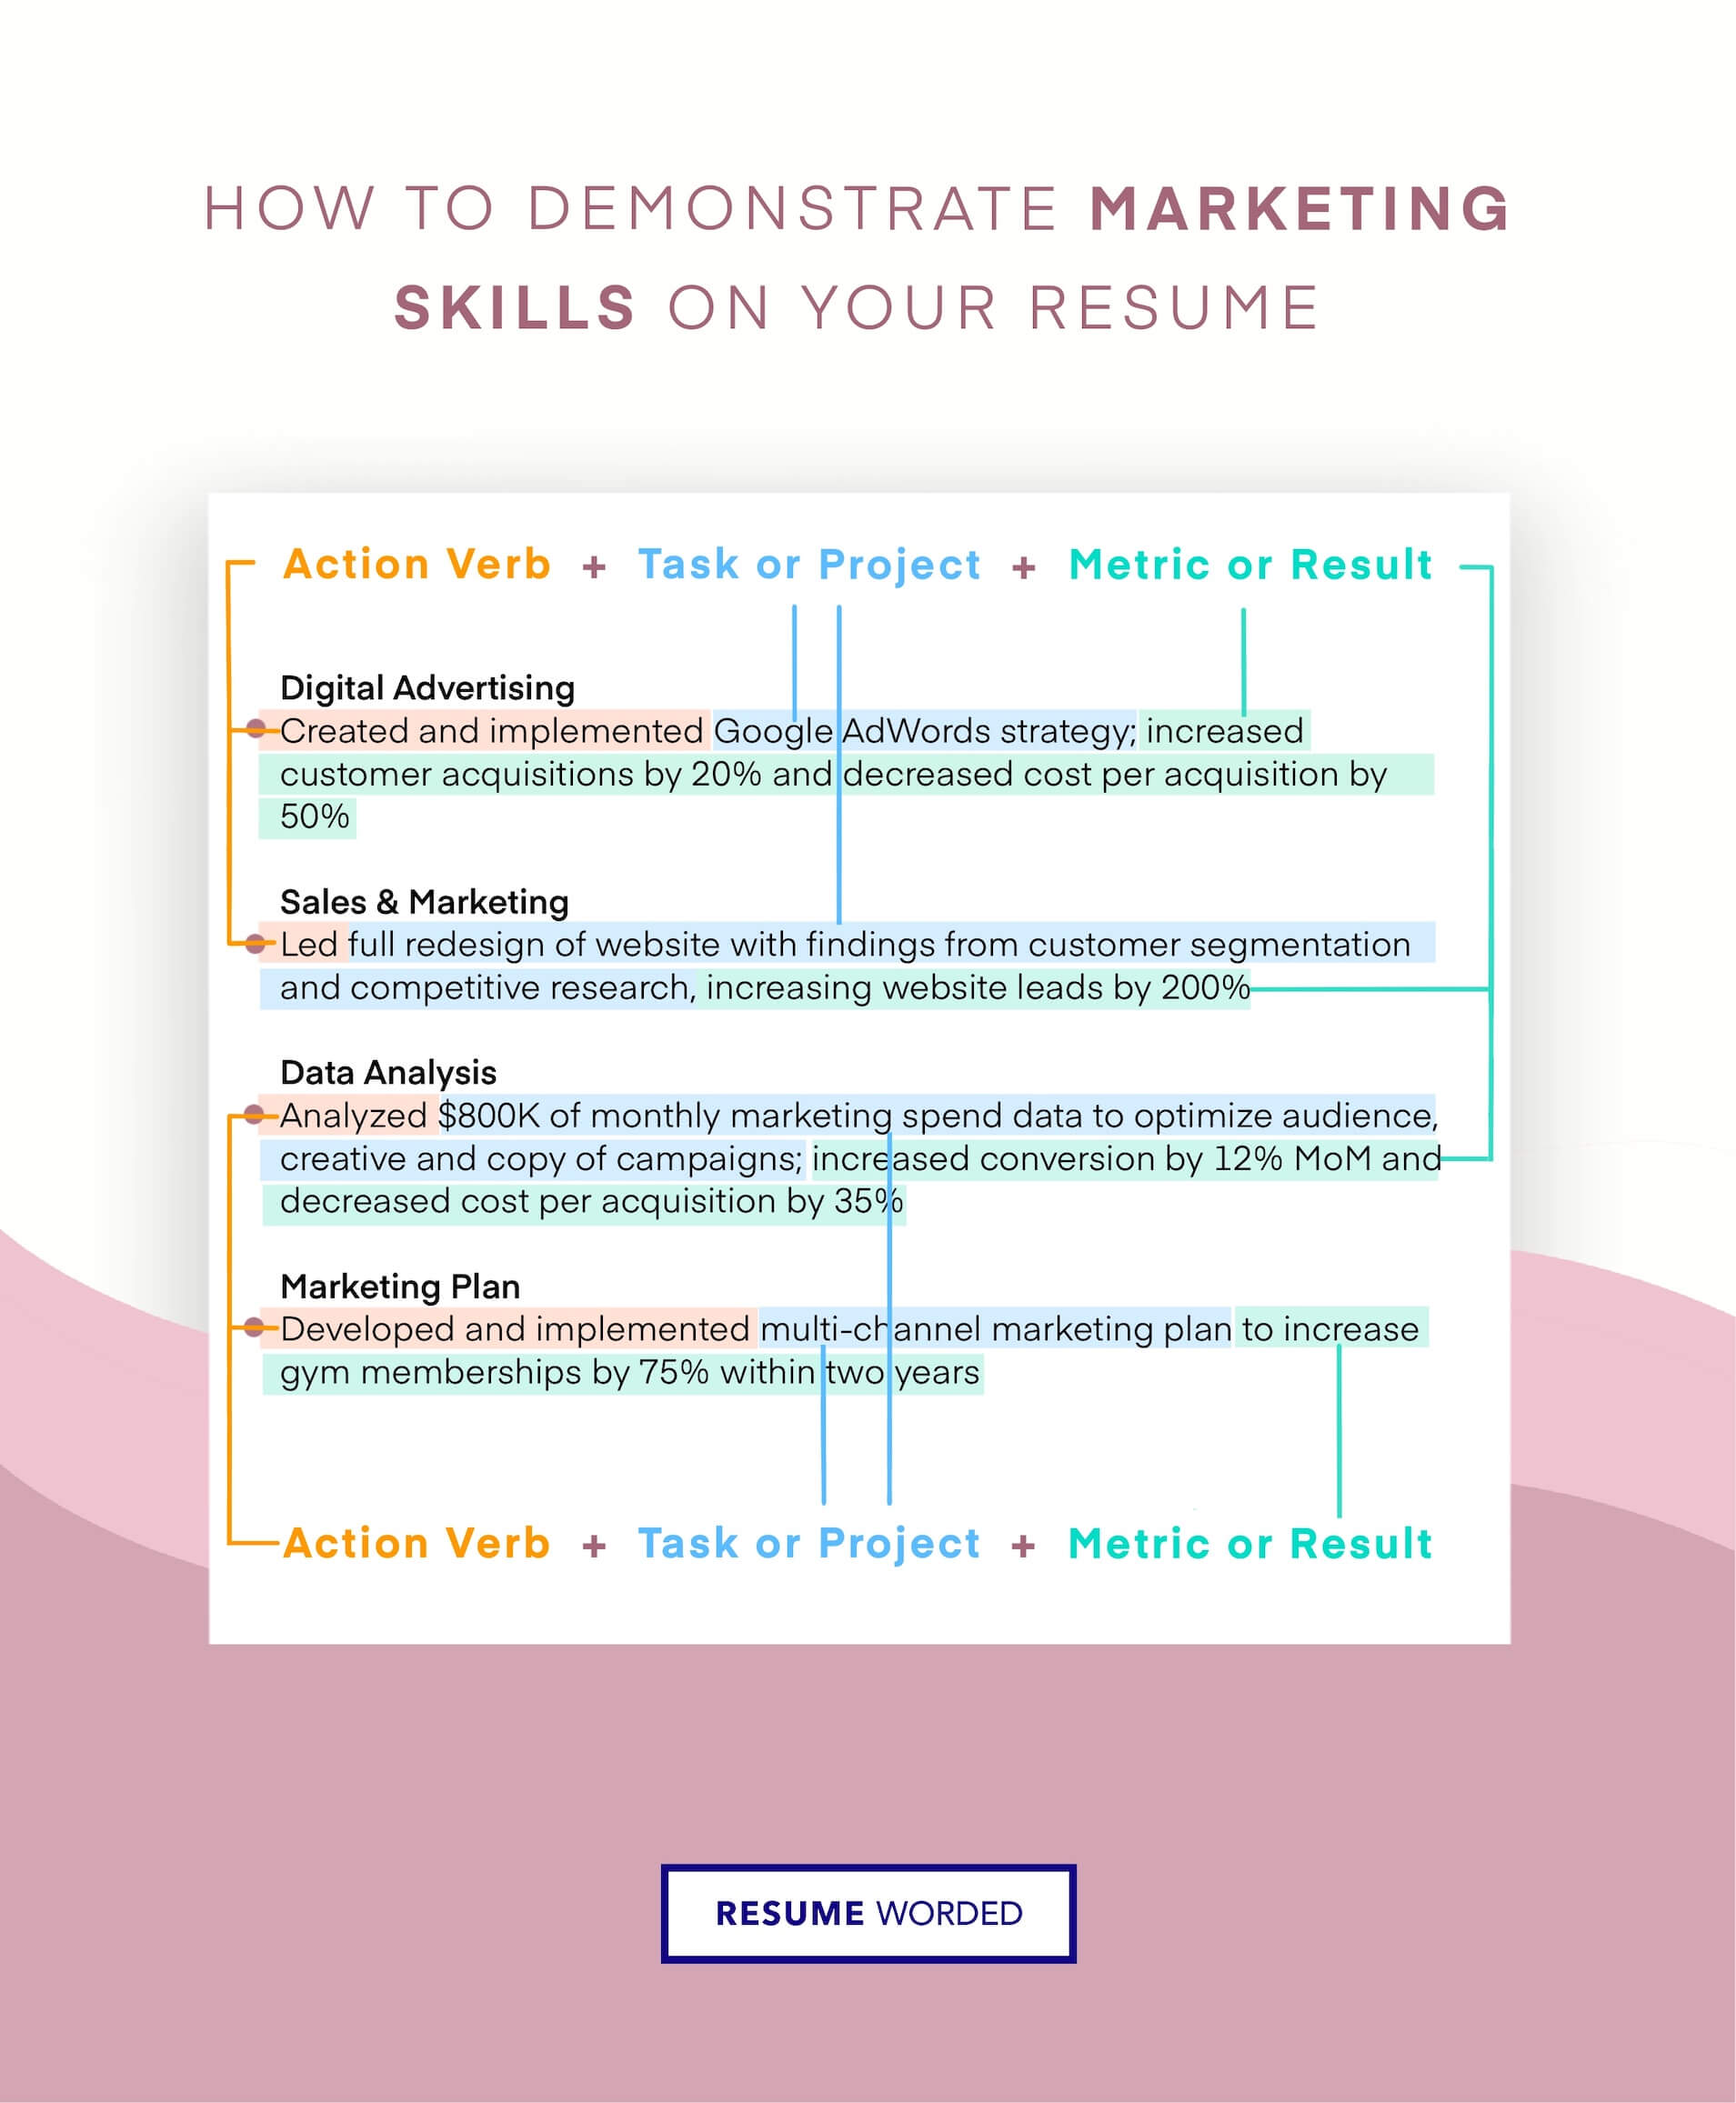 Use of action verbs relating to the creative industry and marketing - Creative Marketing Director Resume